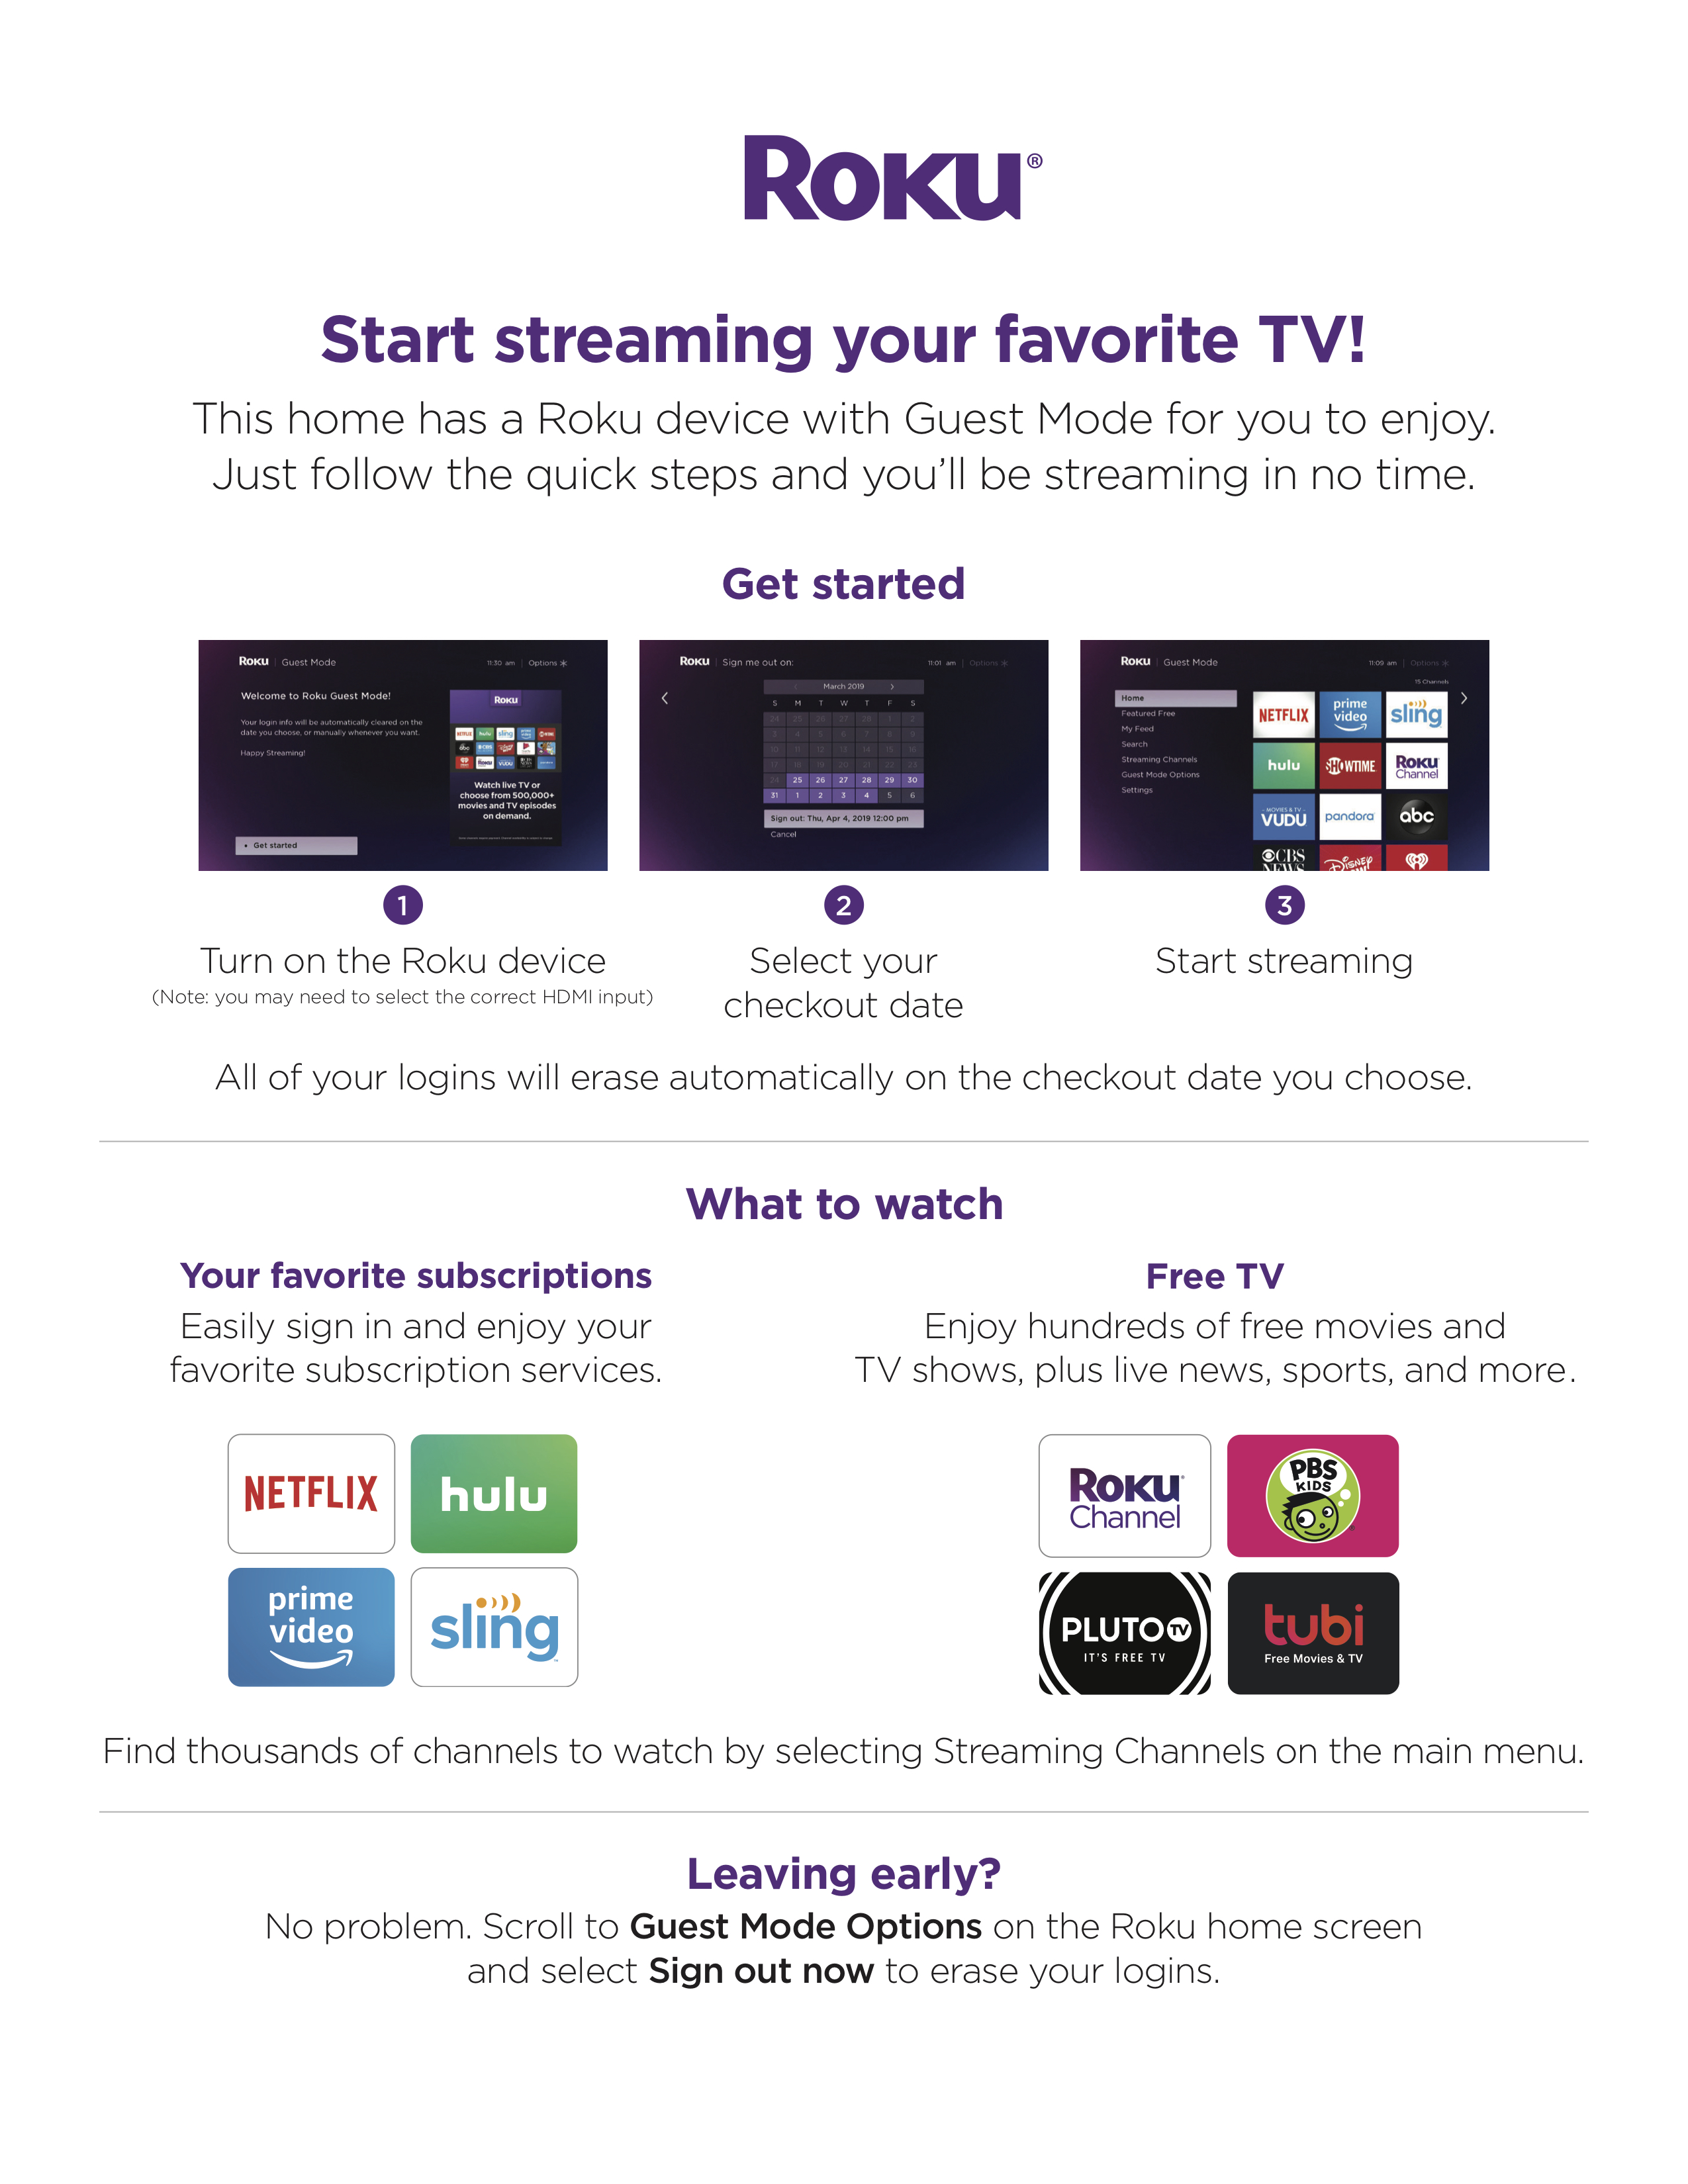 User Profiles now available for  Prime Video users on Roku +